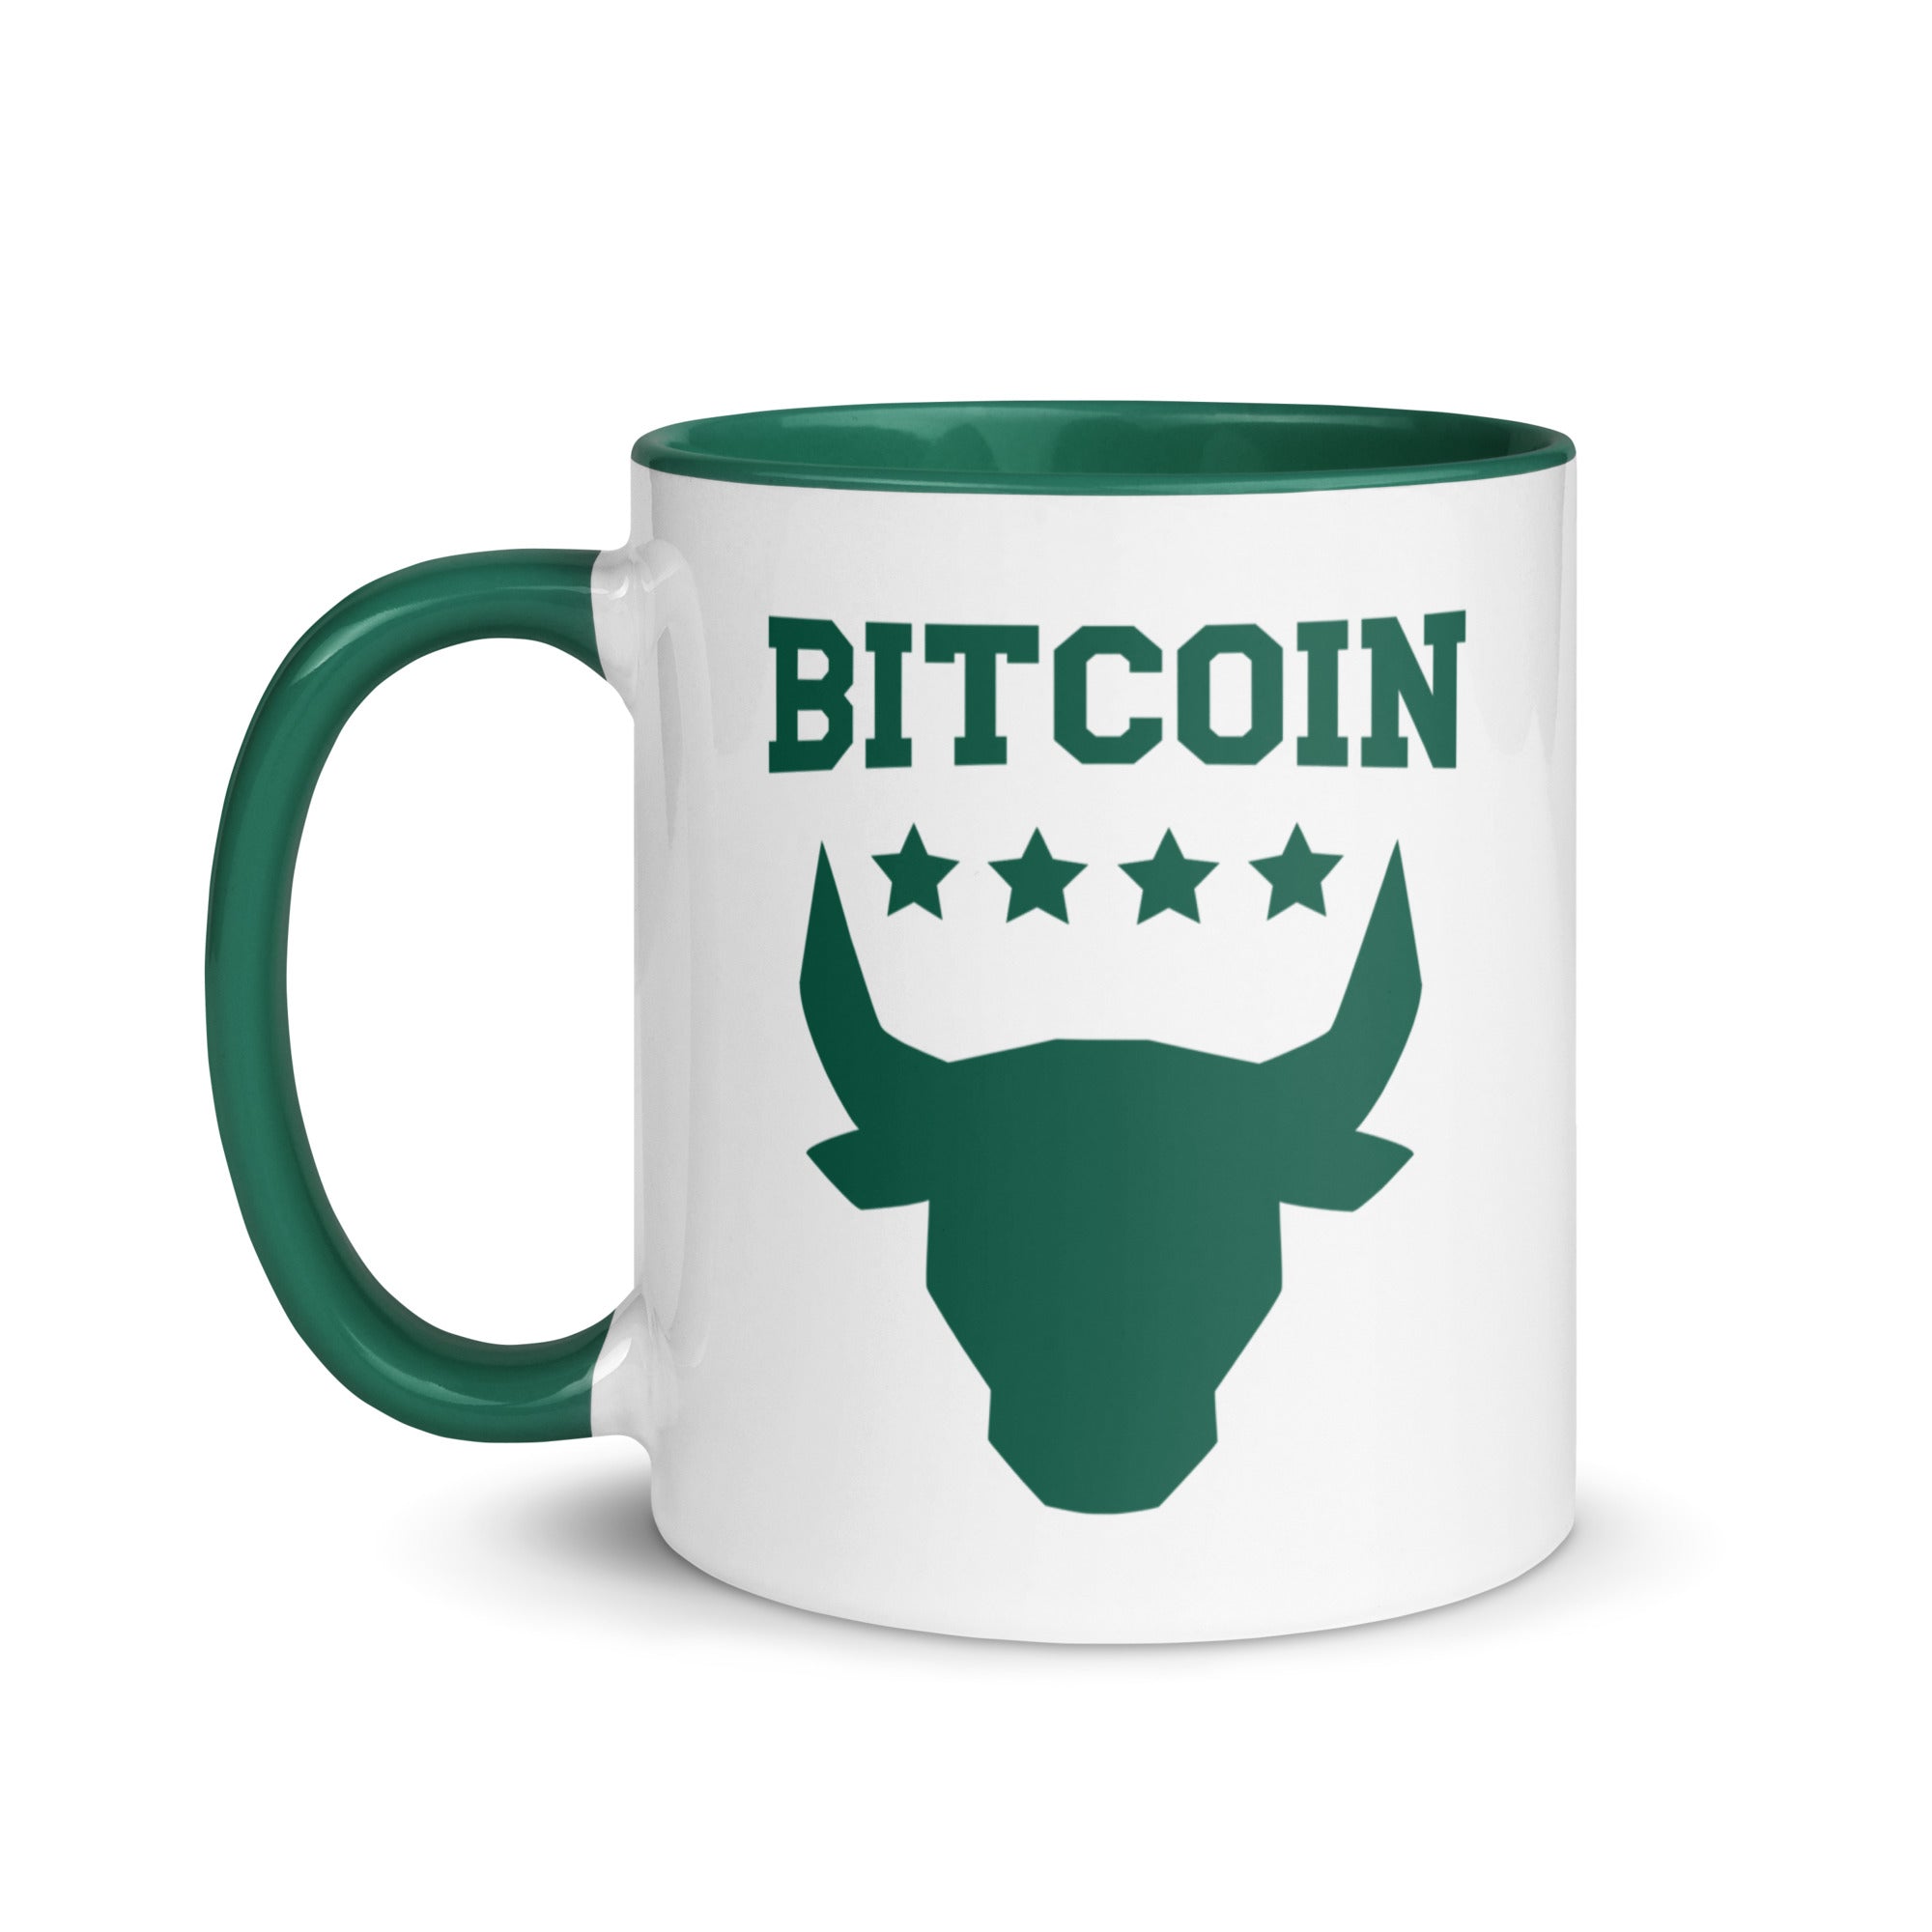 Bitcoin Merchandise: Bitcoin Bull Mug (left handle view). Available from NEONCRYPTO STORE.